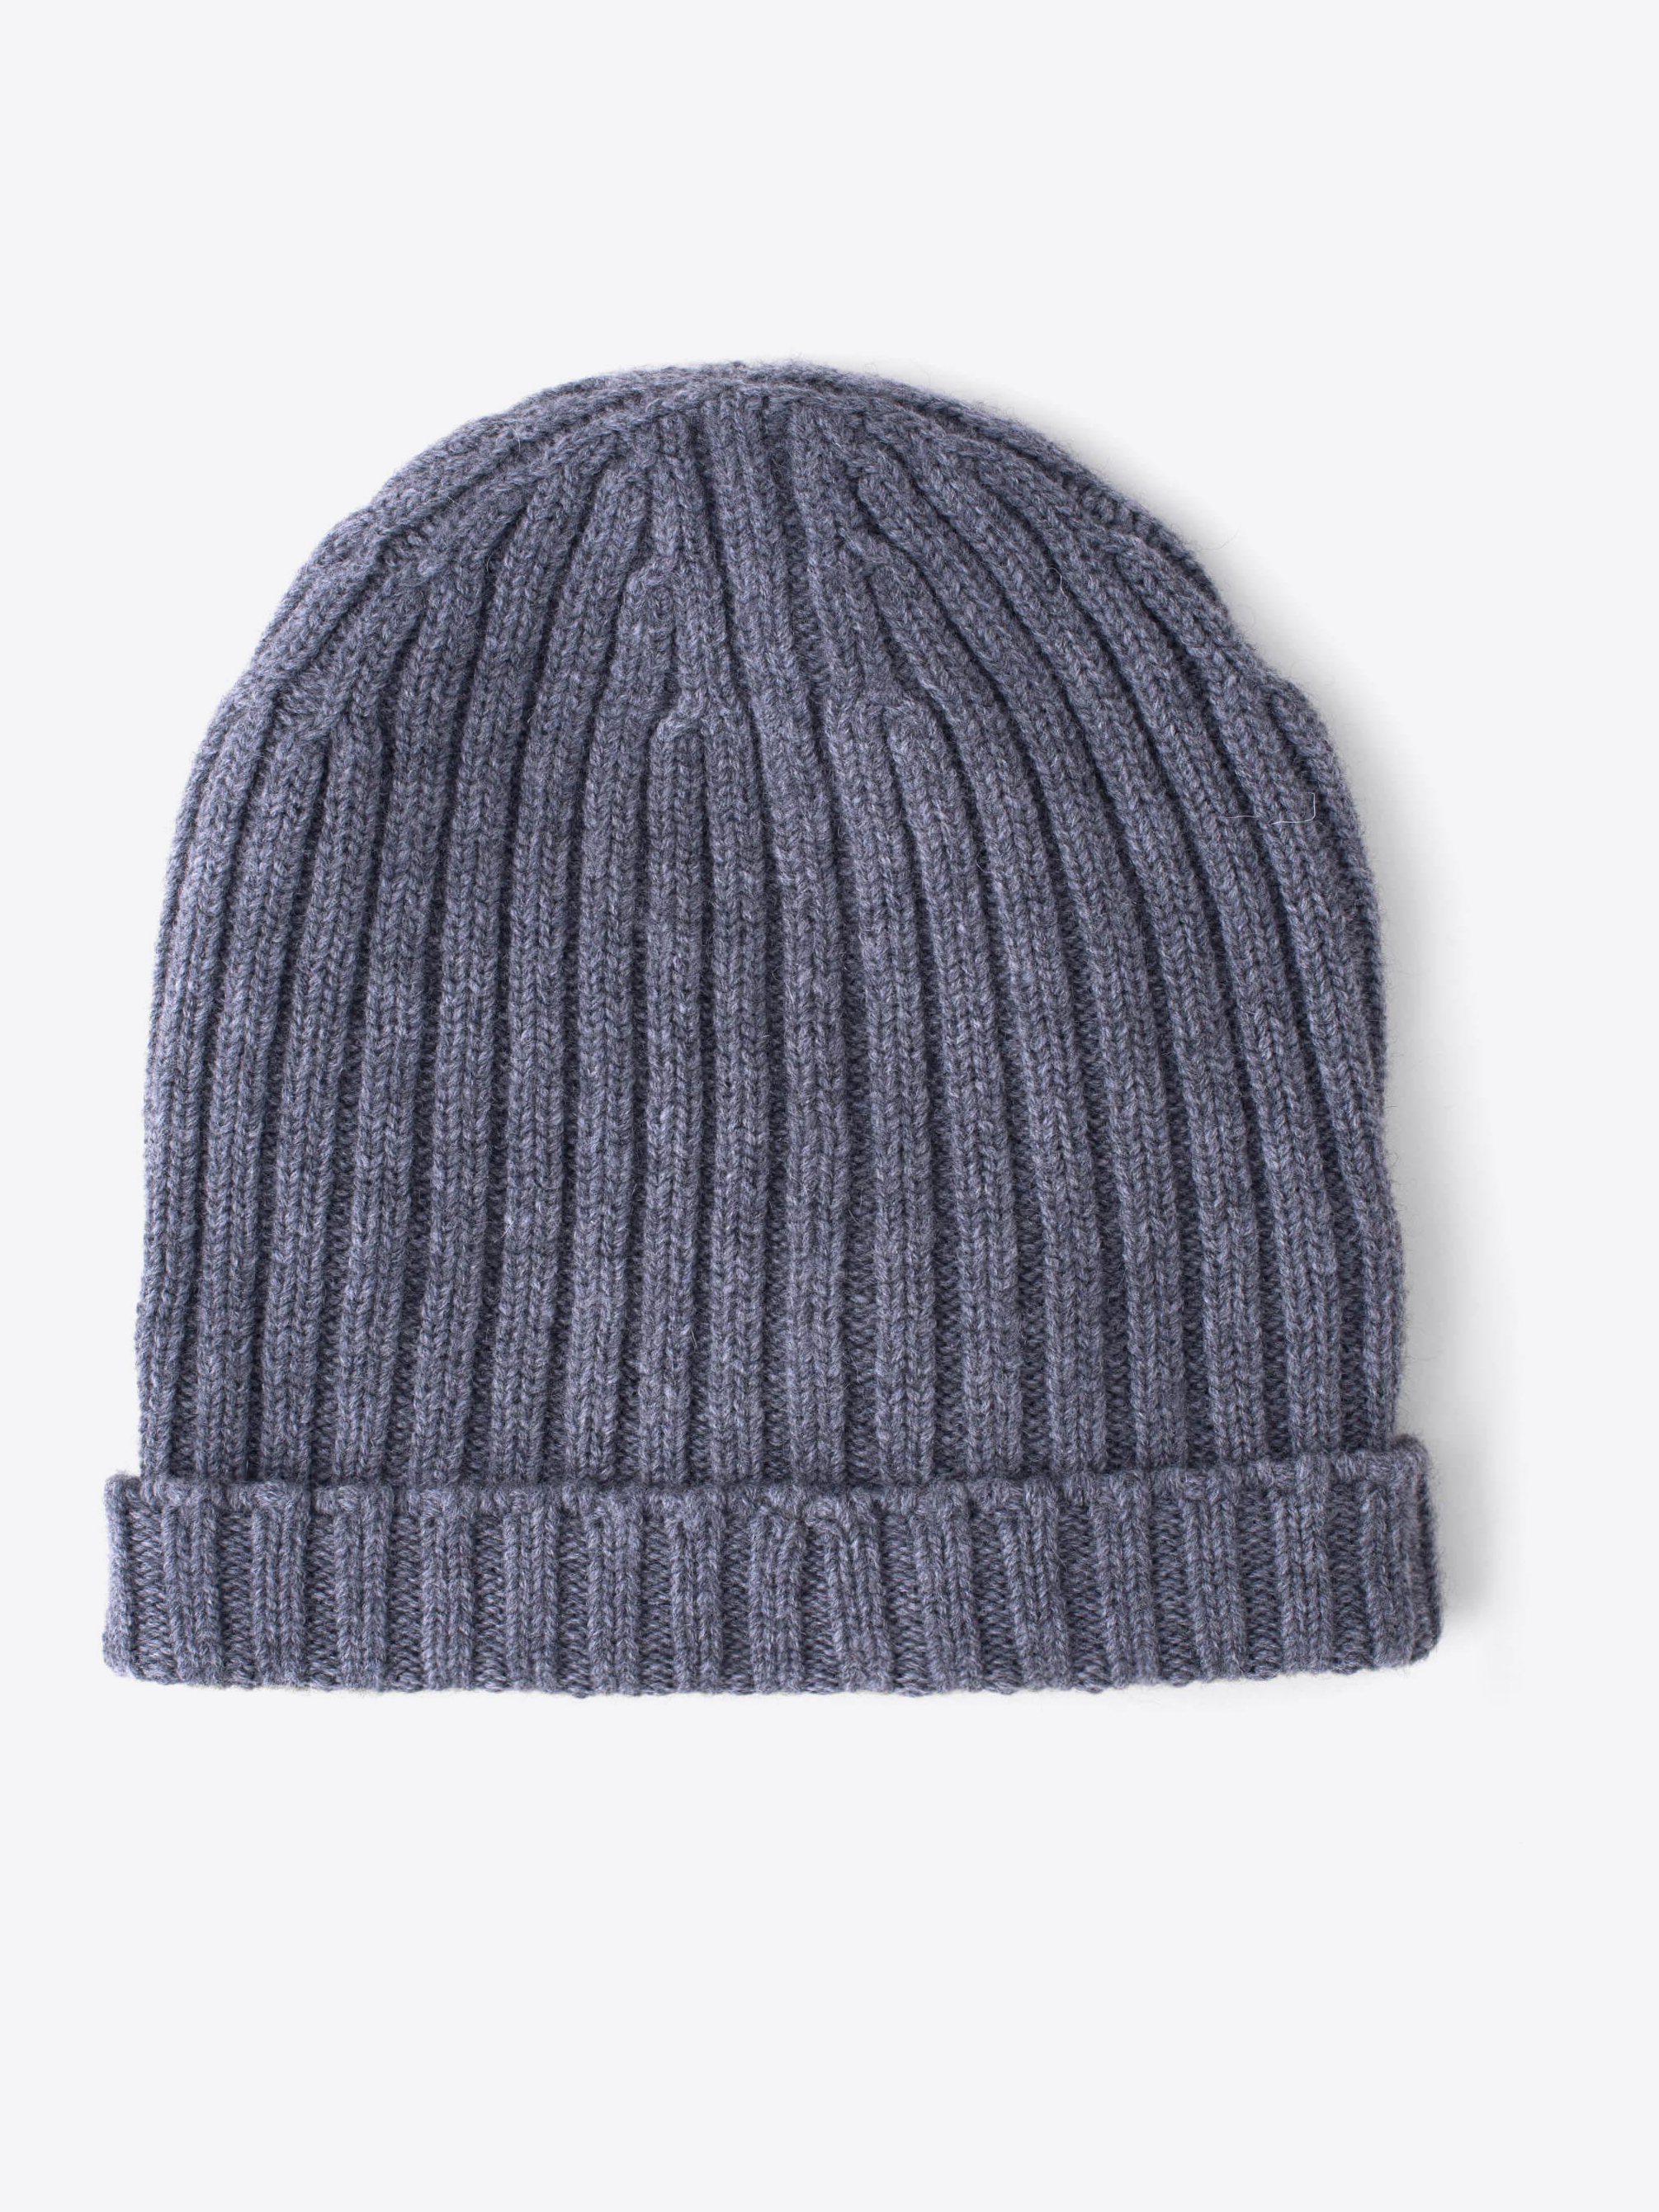 Zoom Image of Grey Wool and Cashmere Italian Knit Hat